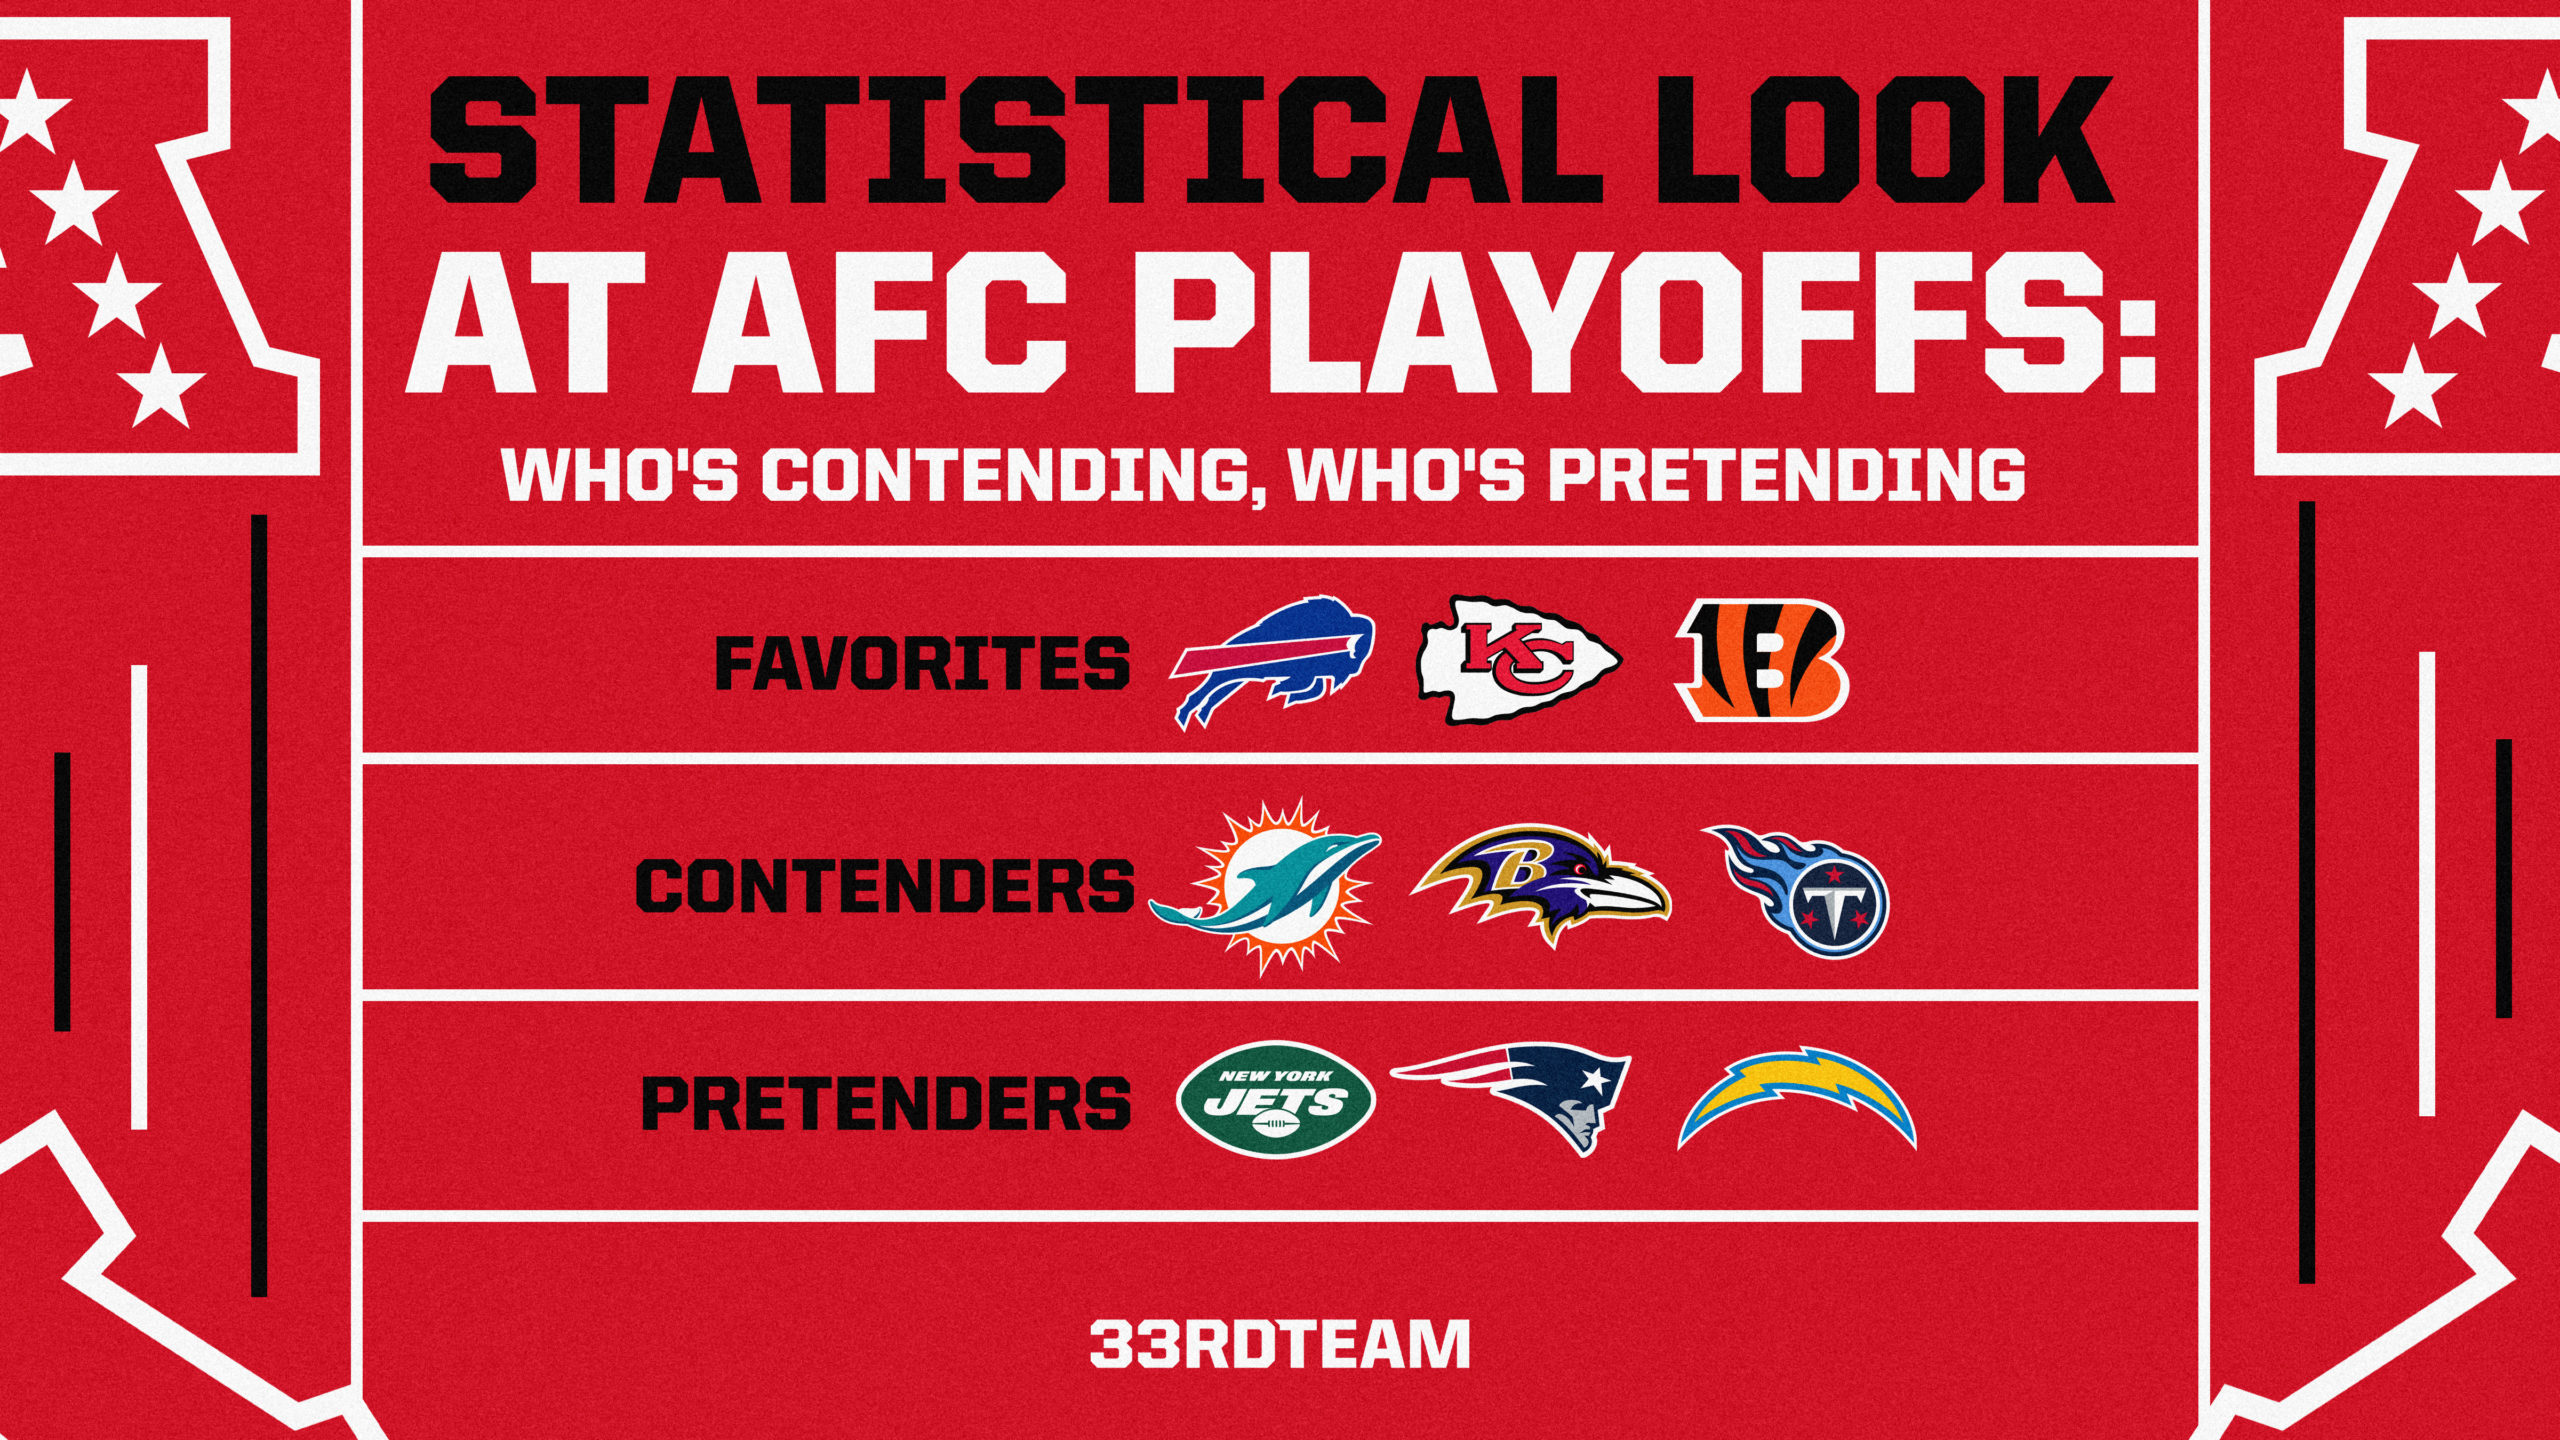 2022 AFC Playoff Picture: Who’s Contending, Who’s Pretending?